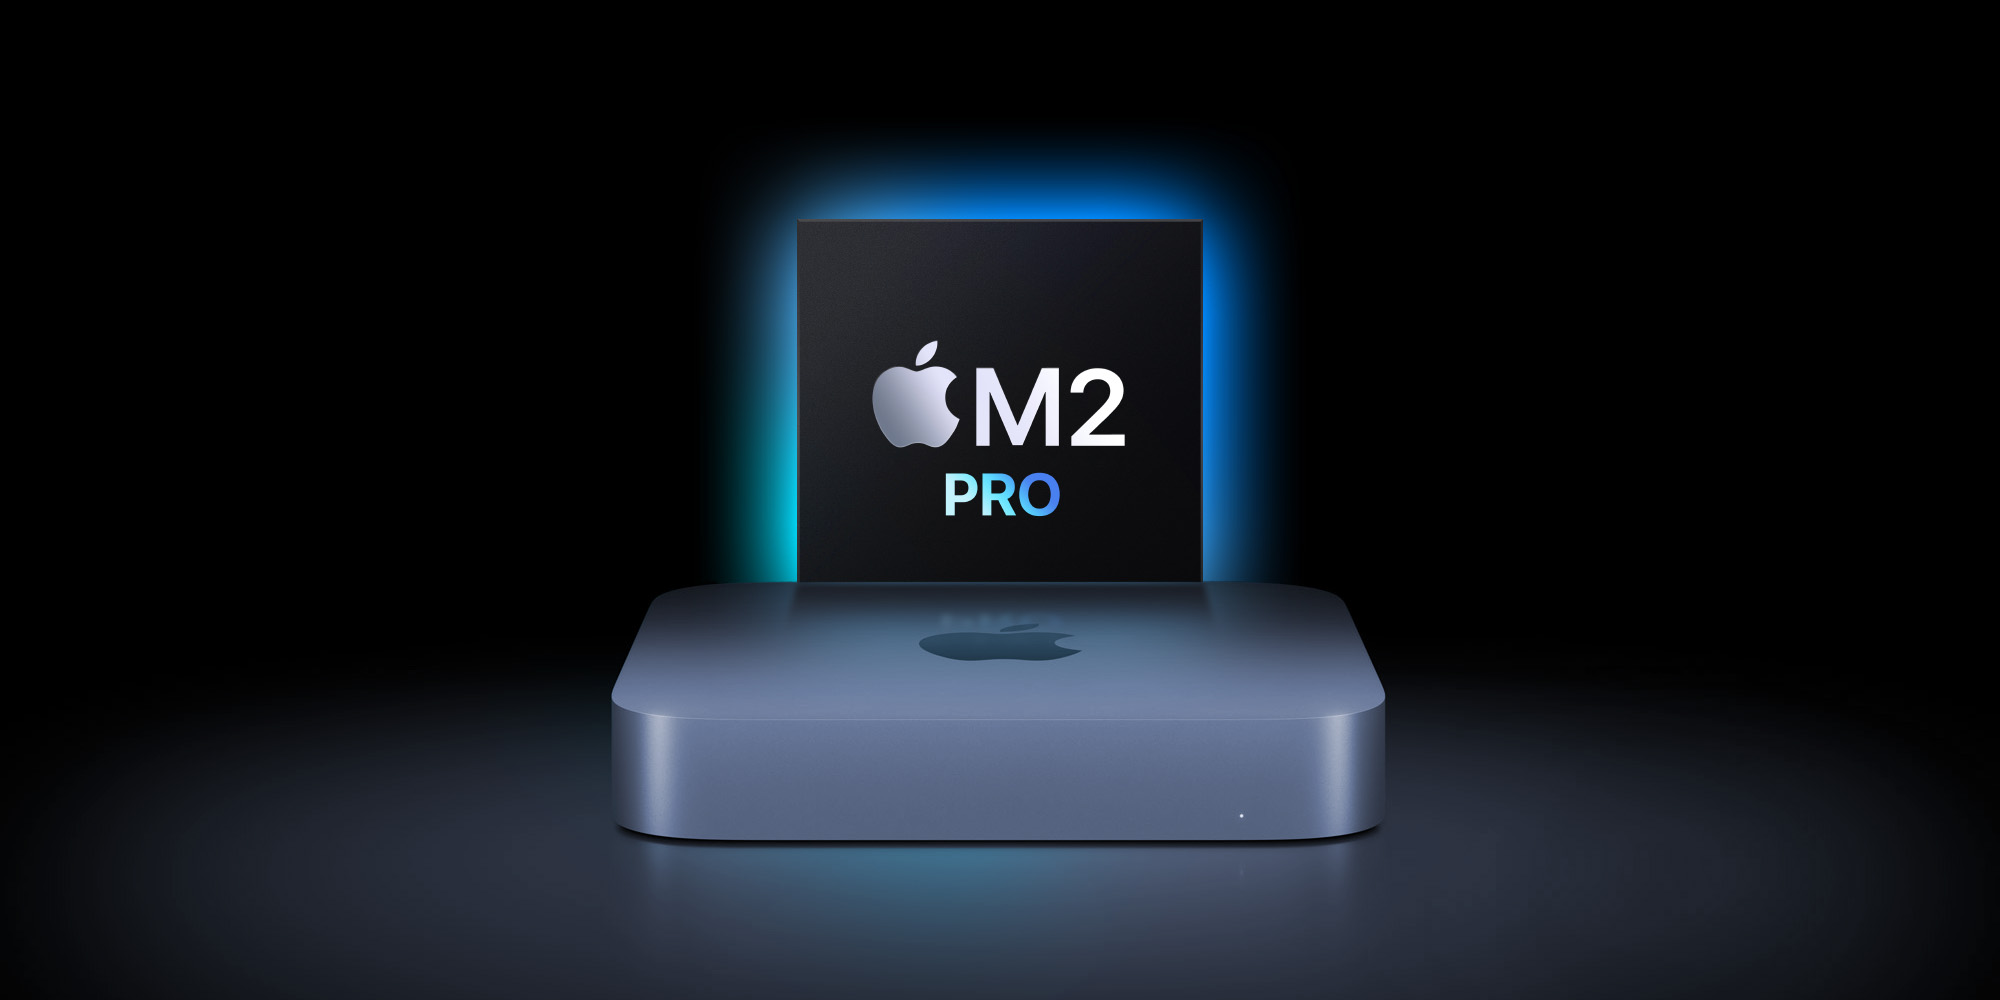 A Review of the M2 Pro Mac mini